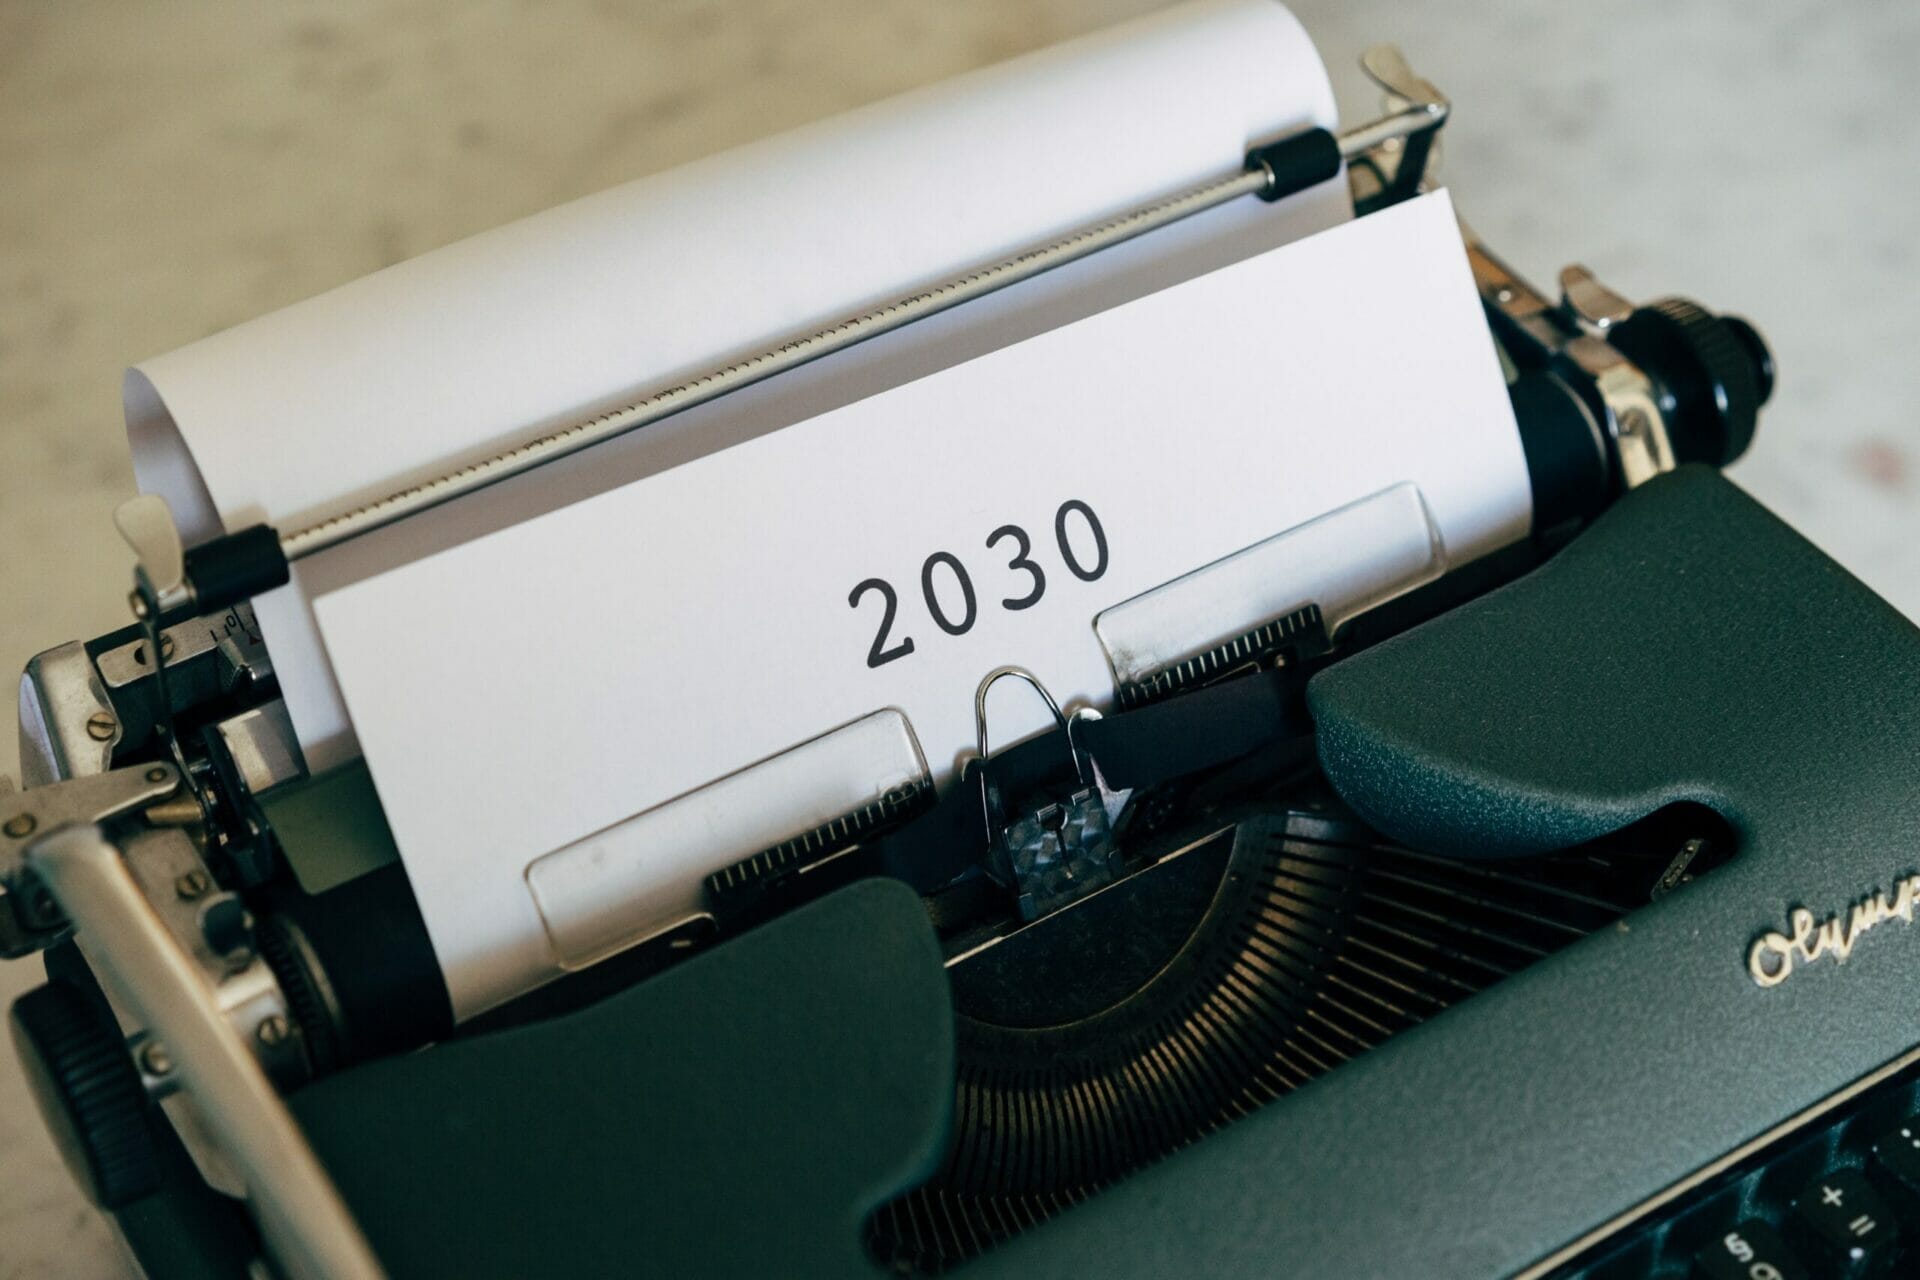 Typewriter with paper showing the text "2030"